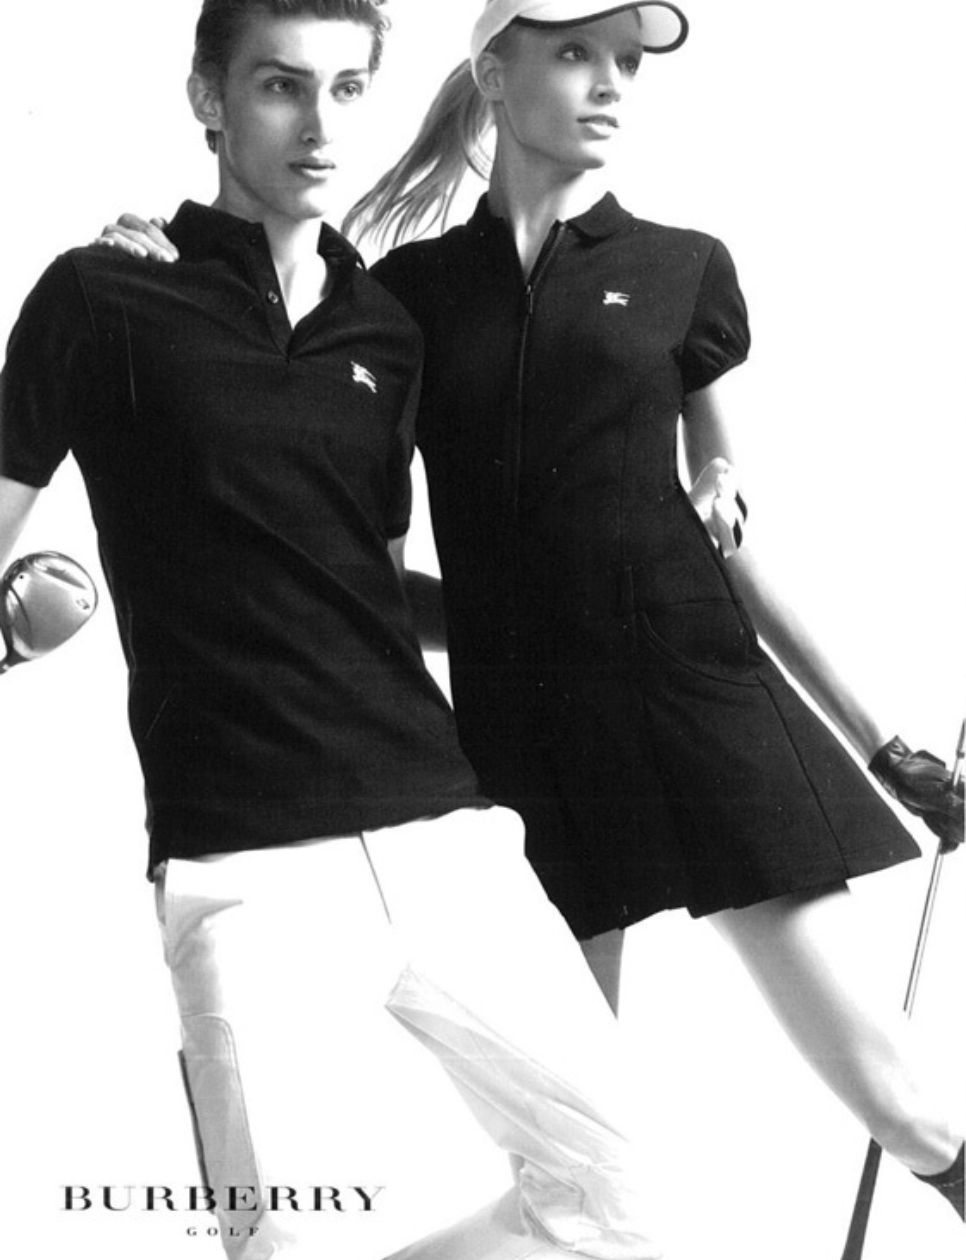 Burberry Golf Spring Summer 2011 Ad Campaign